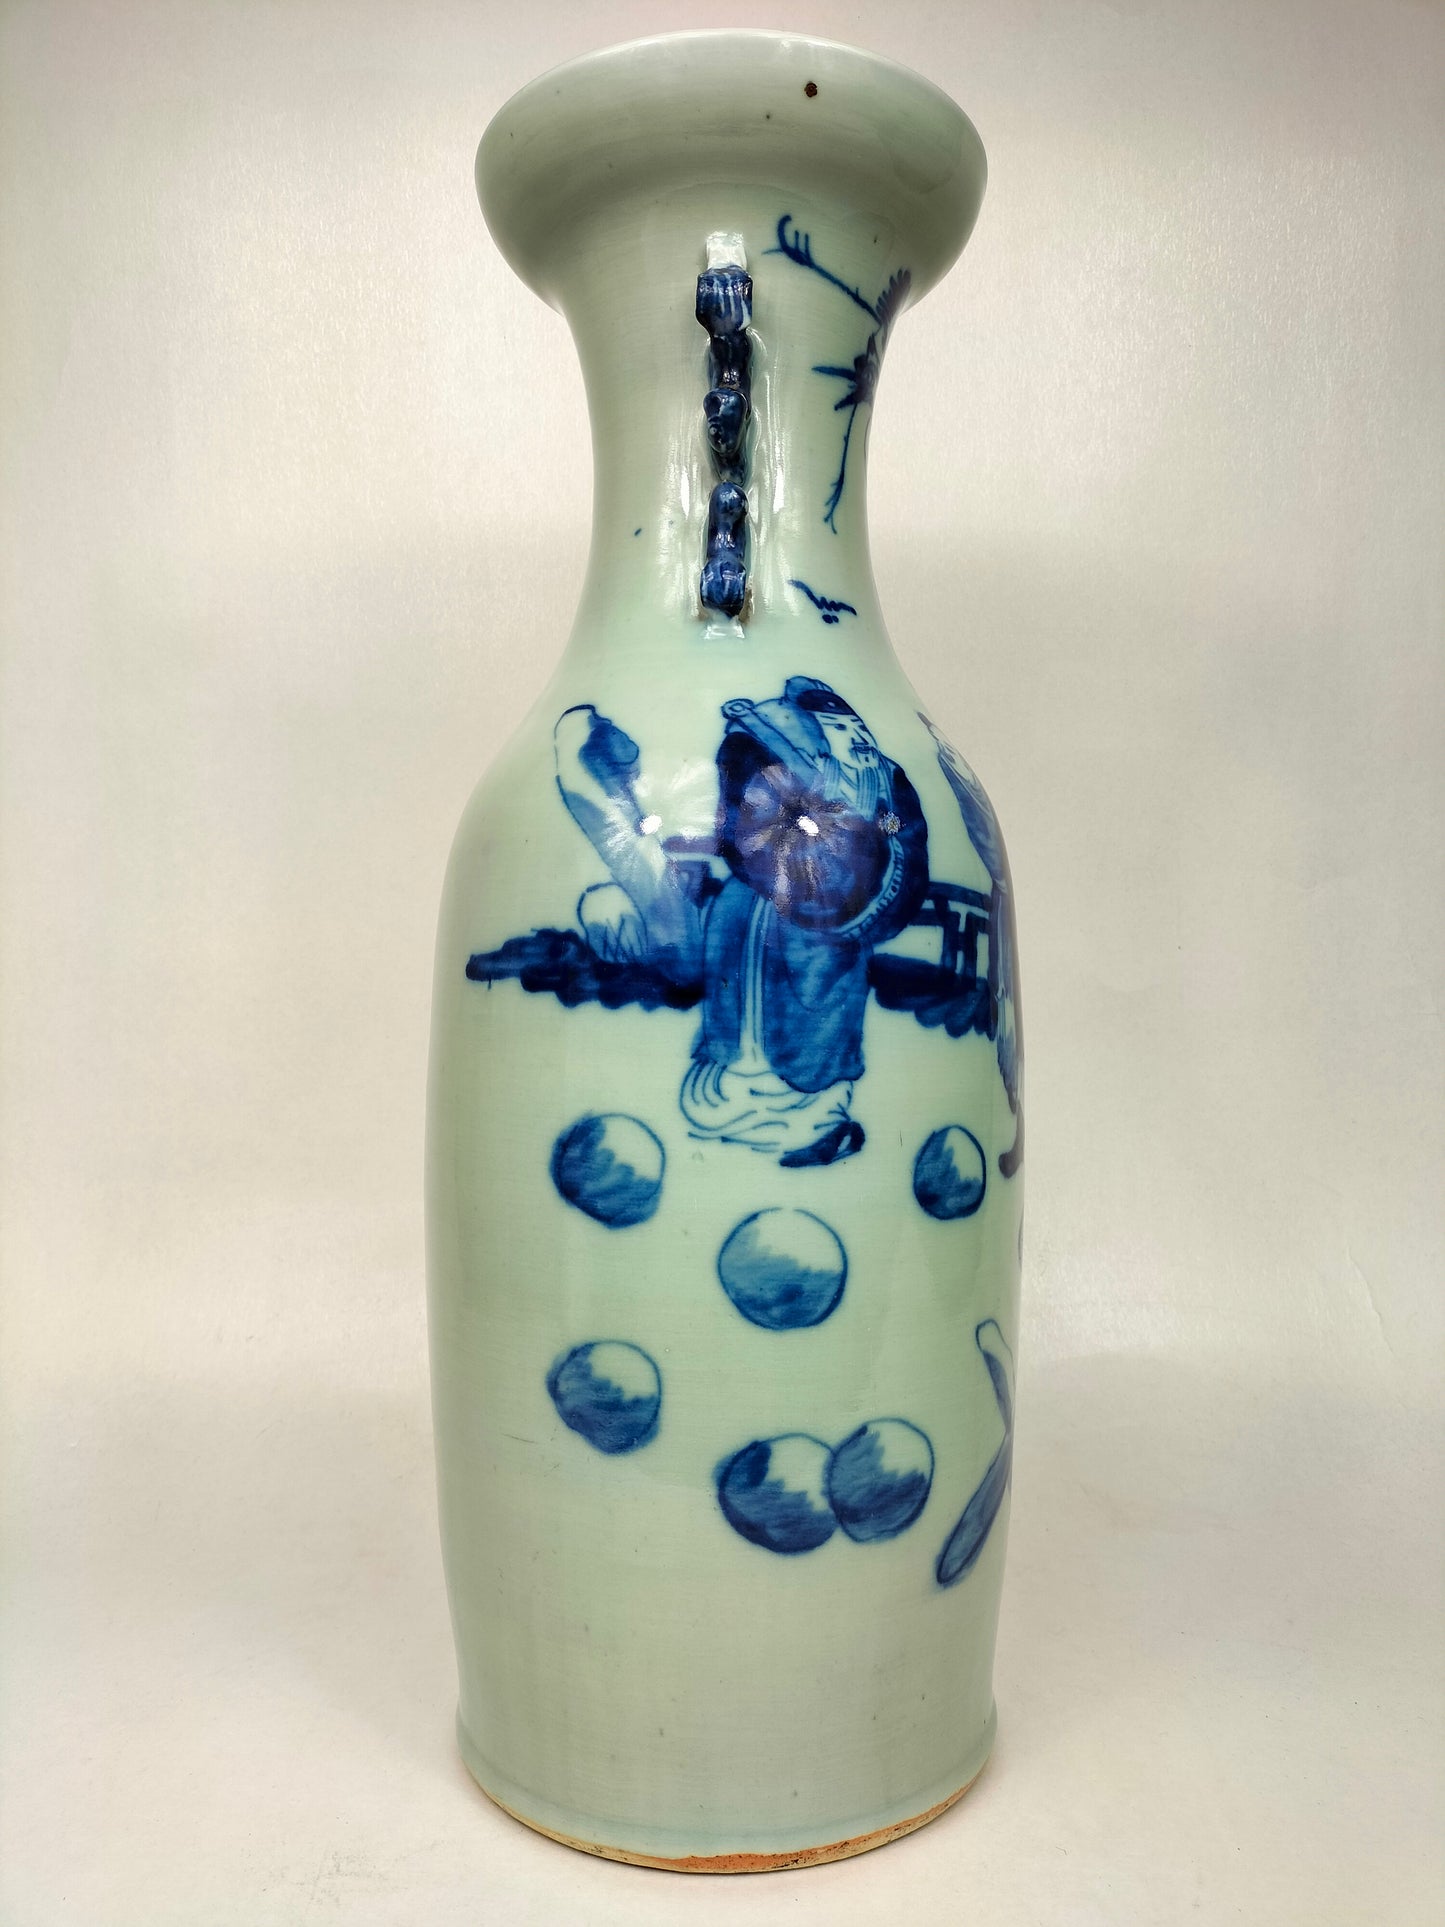 Large antique Chinese celadon vase decorated with sages // Qing Dynasty - 19th century